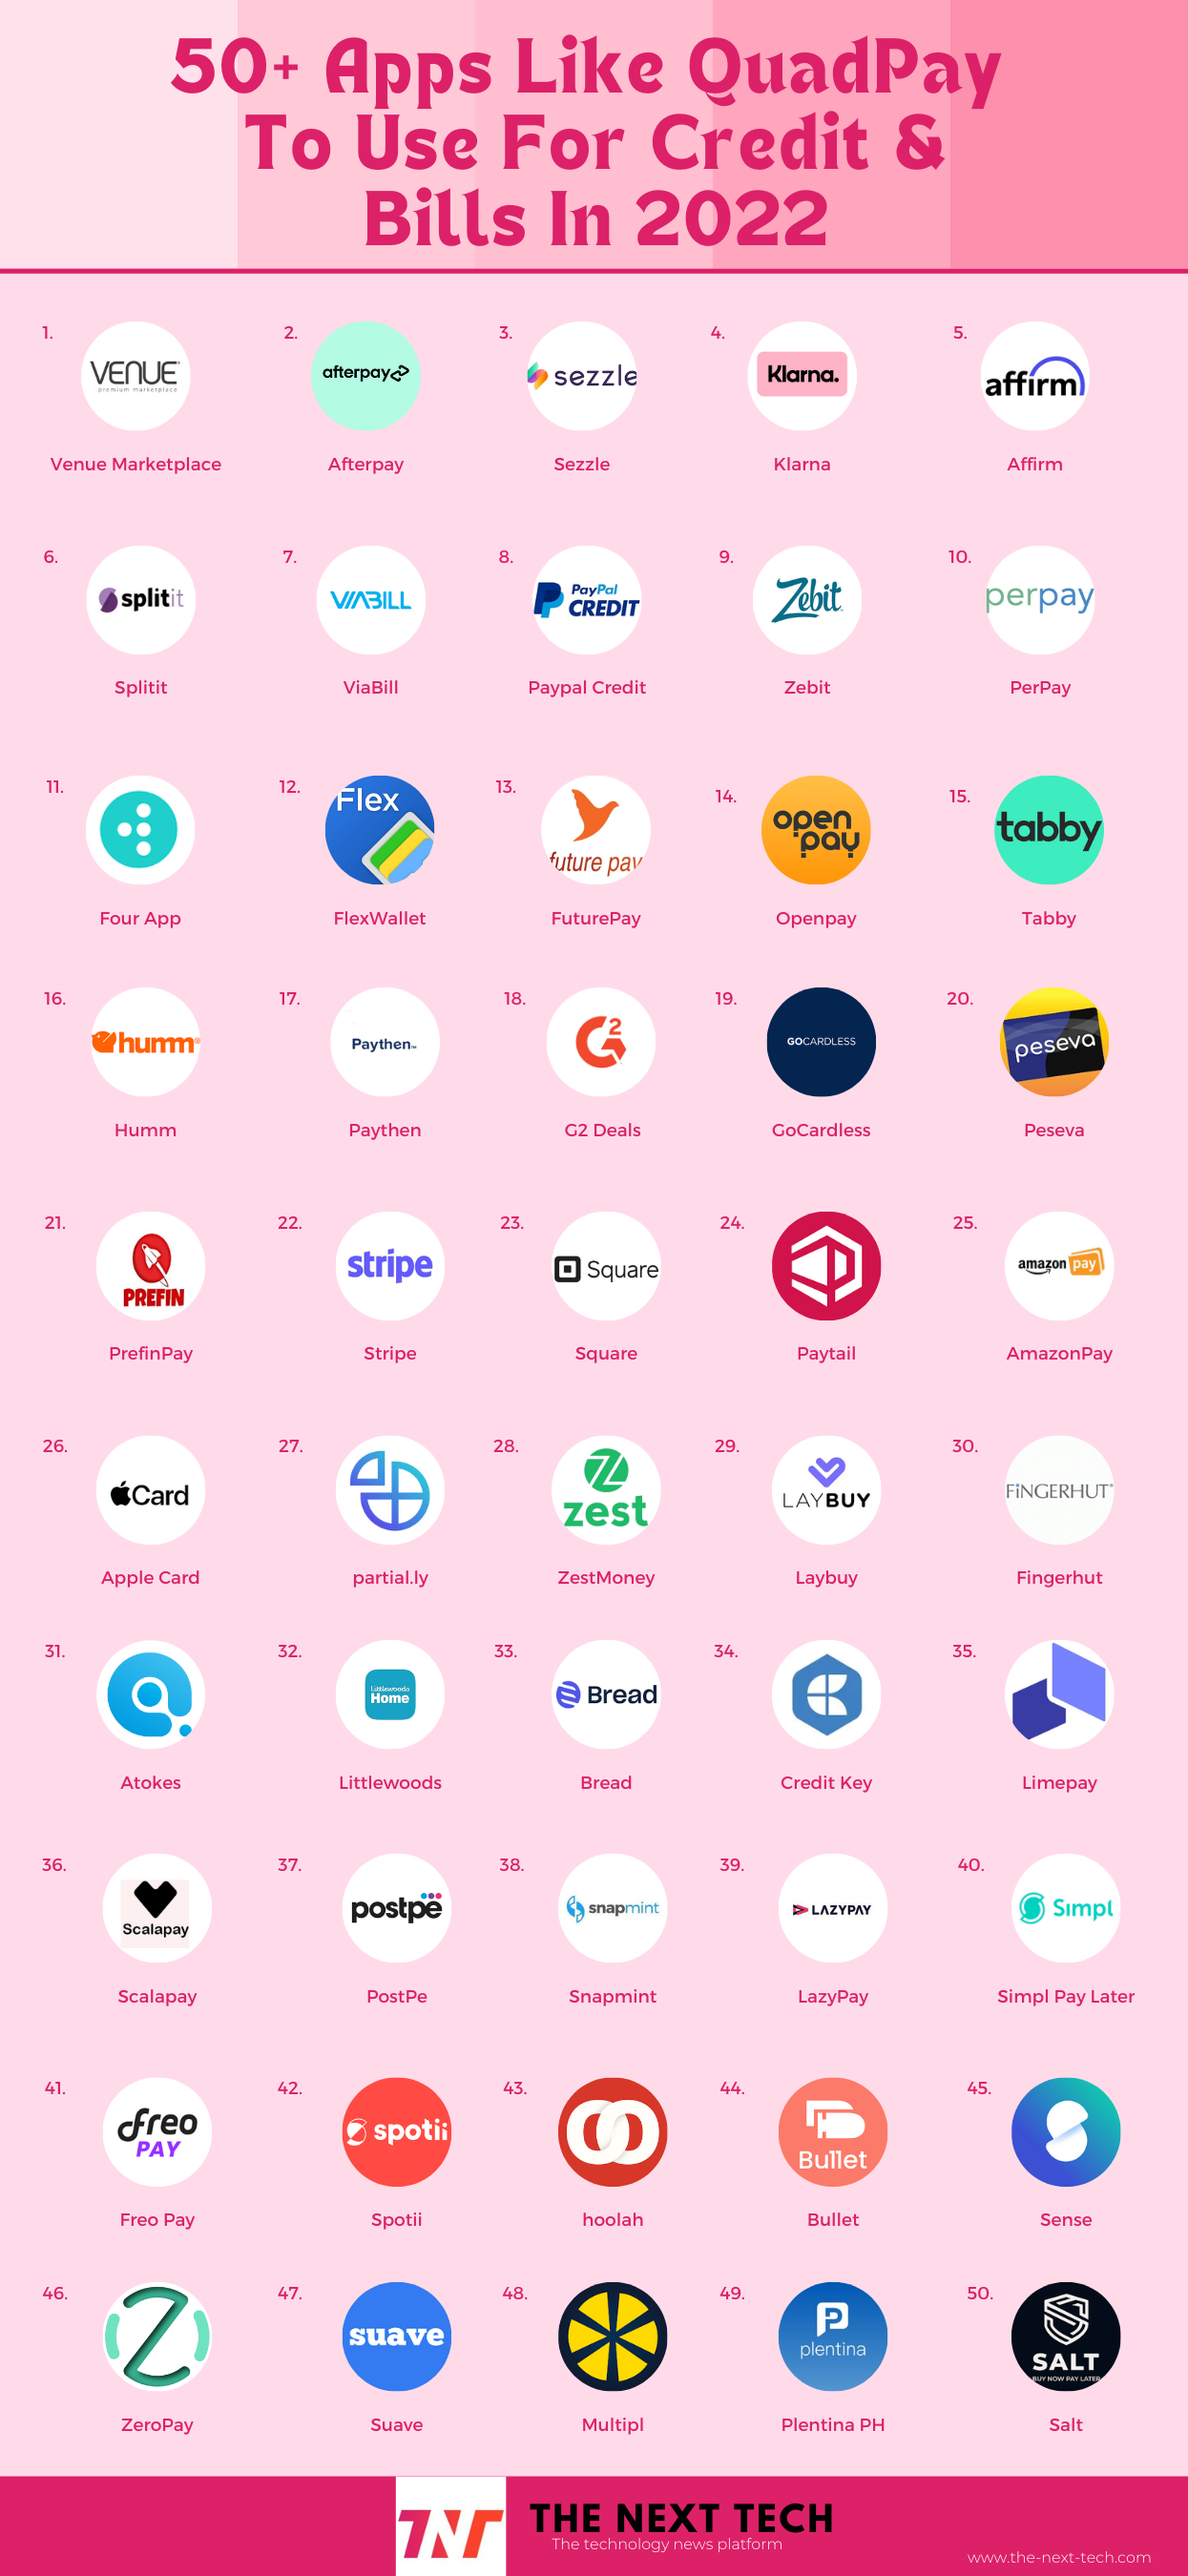 Apps like QuadPay Infographic